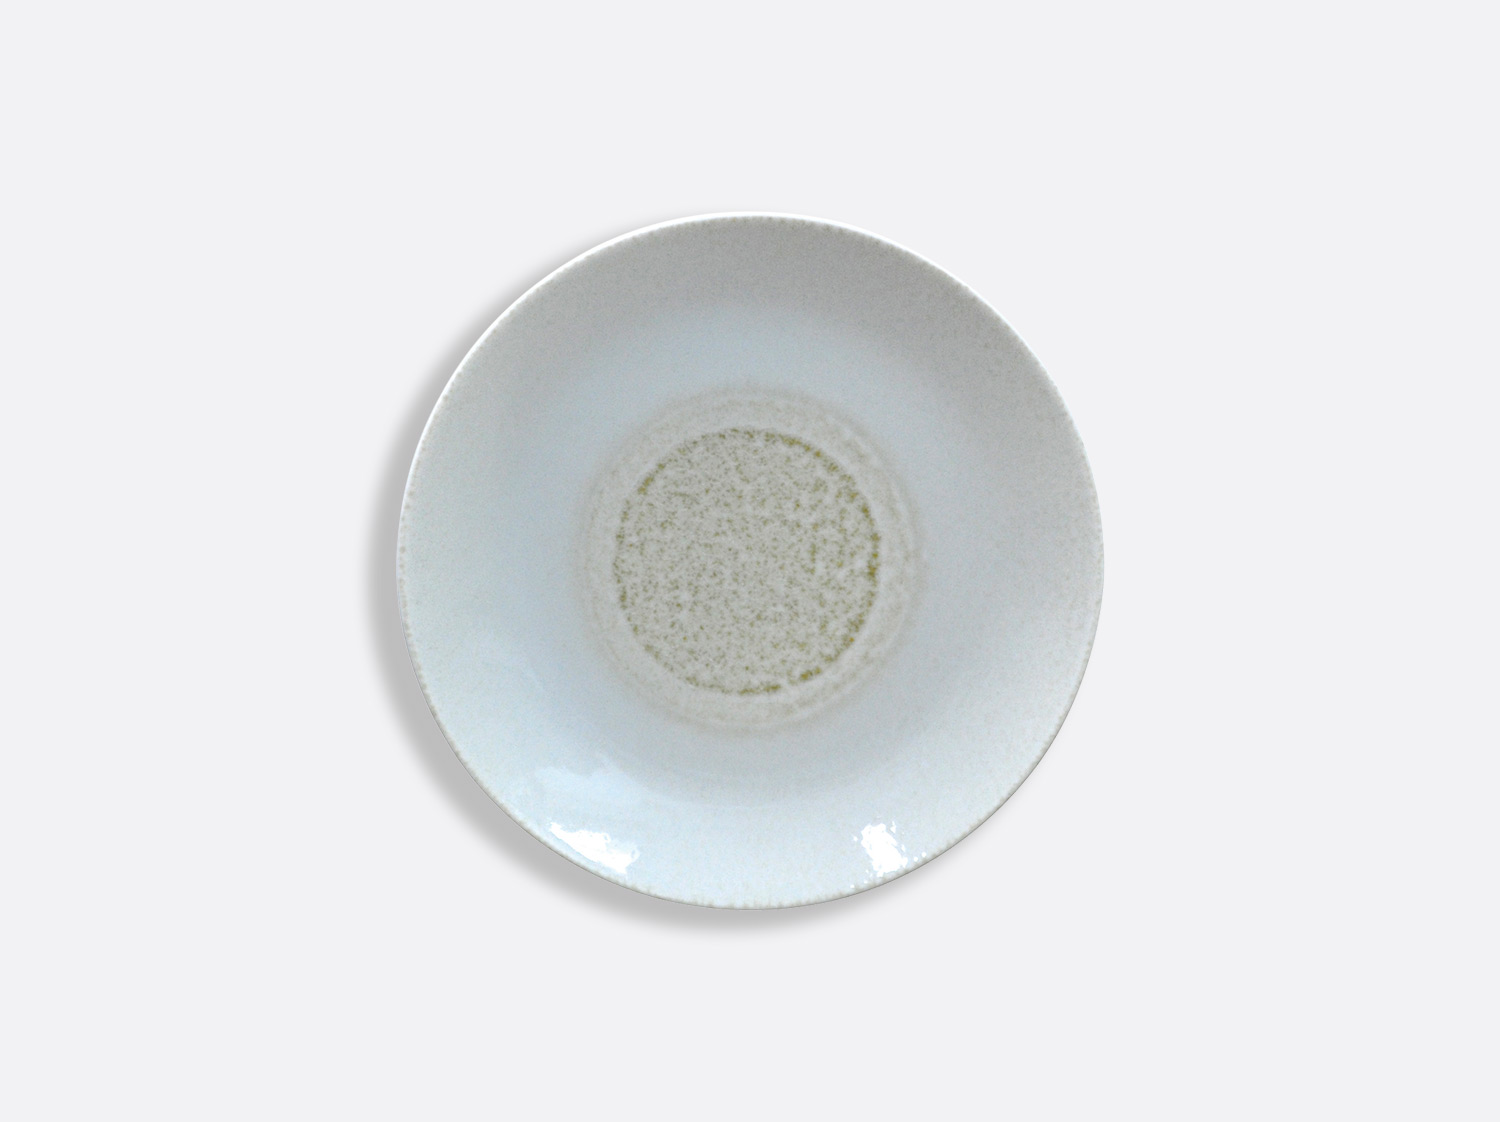 China Ivoire coupe plate 5.5" of the collection Iris Ivoire | Bernardaud